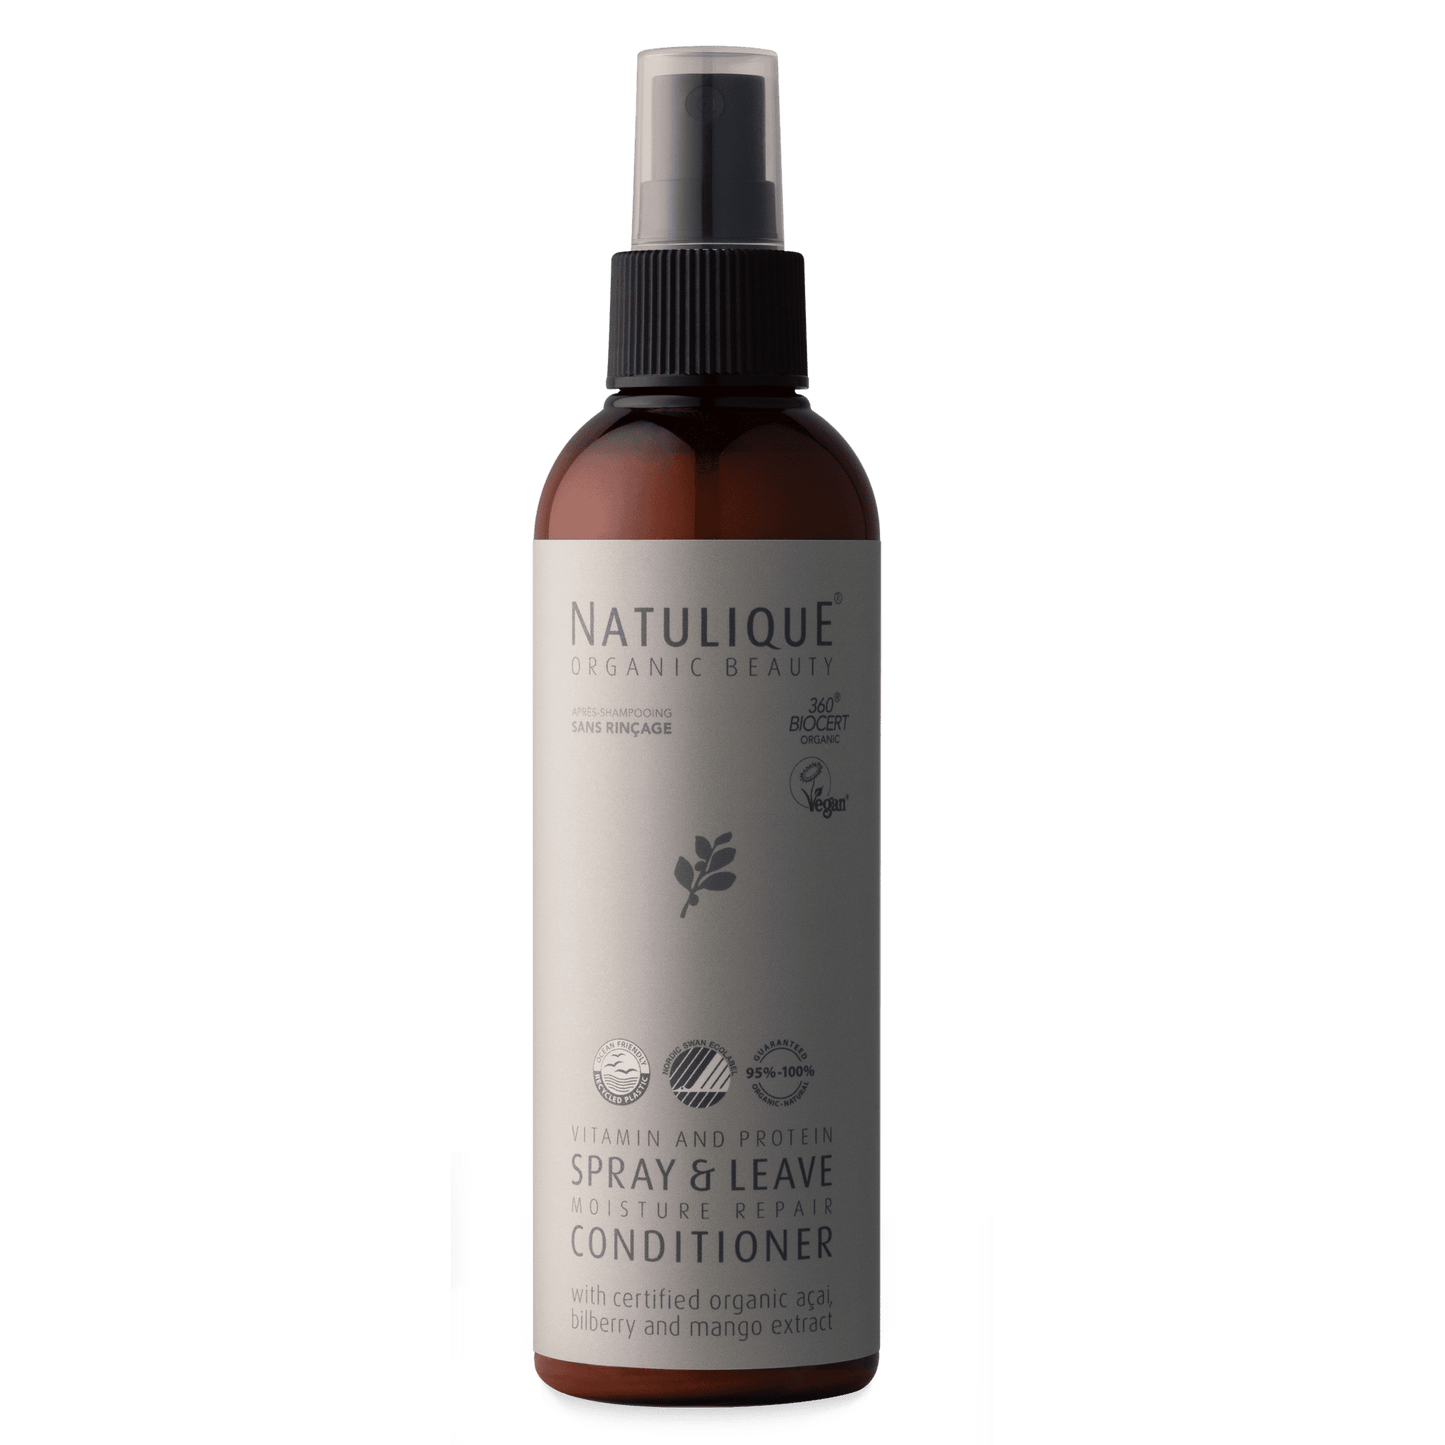 NATULIQUE SPRAY AND LEAVE PERFUME FREE CONDITIONER 195 ml - DAMICE Hair & Nails